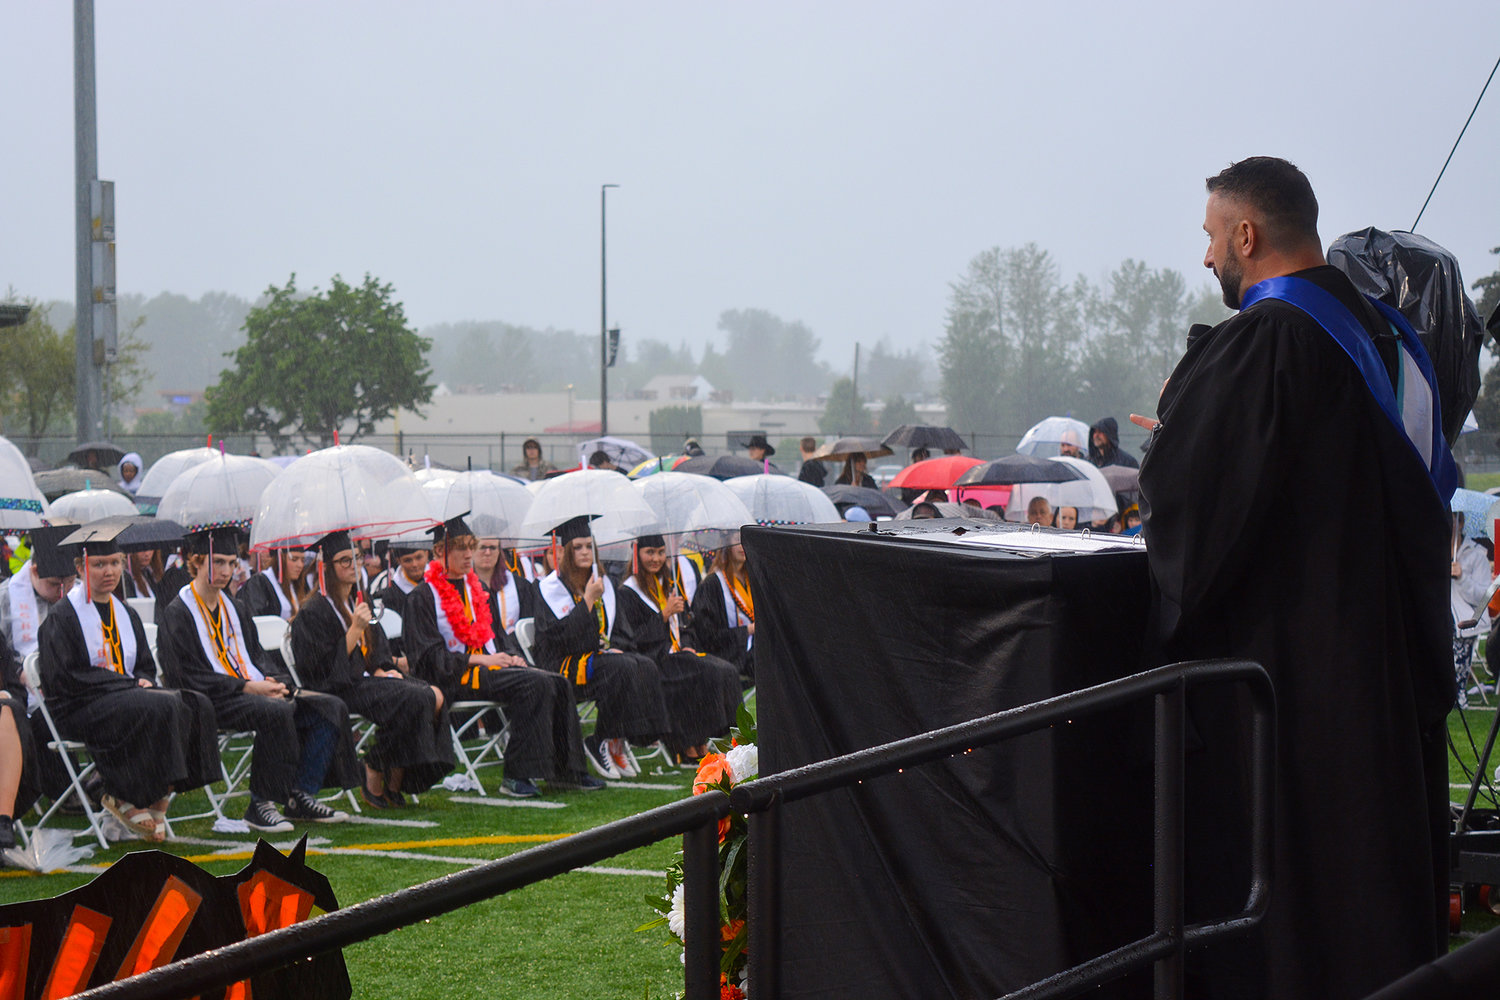 Battle Ground High School Principal Charbonneau Gourde delivers a speech to his students at the Class of 2022 graduation ceremony on June 10.